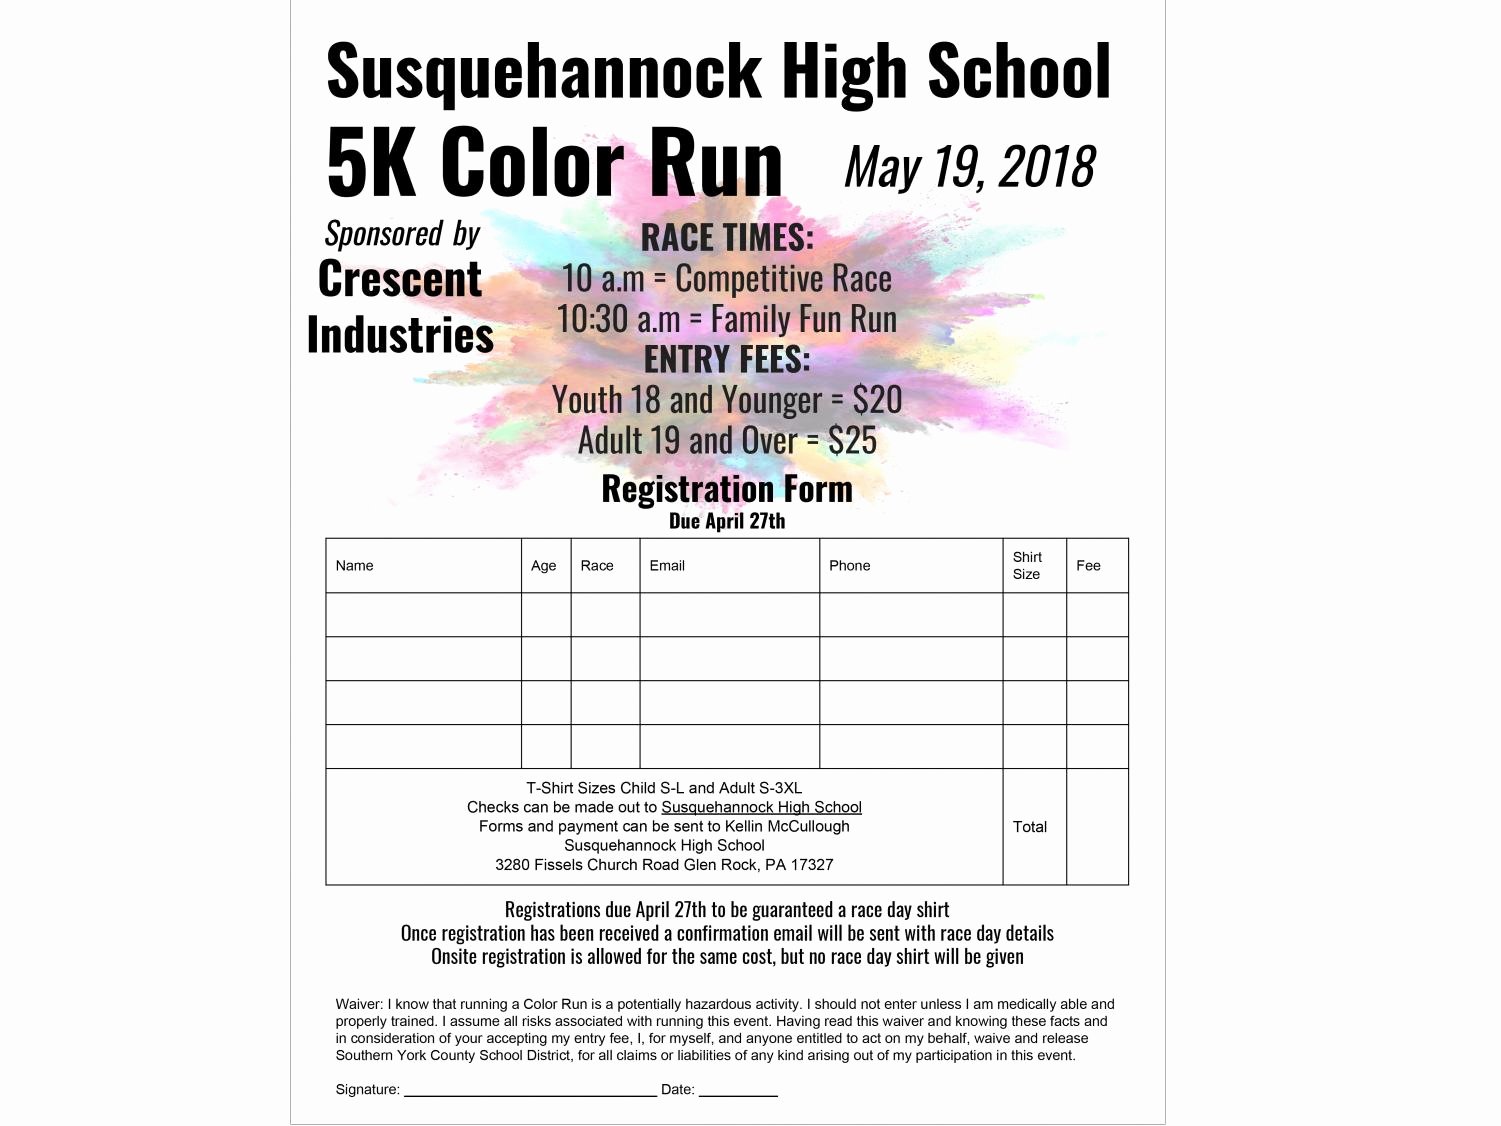 5k Registration form Template Awesome Susquehannock High School Helps Kick Cancer with 5k